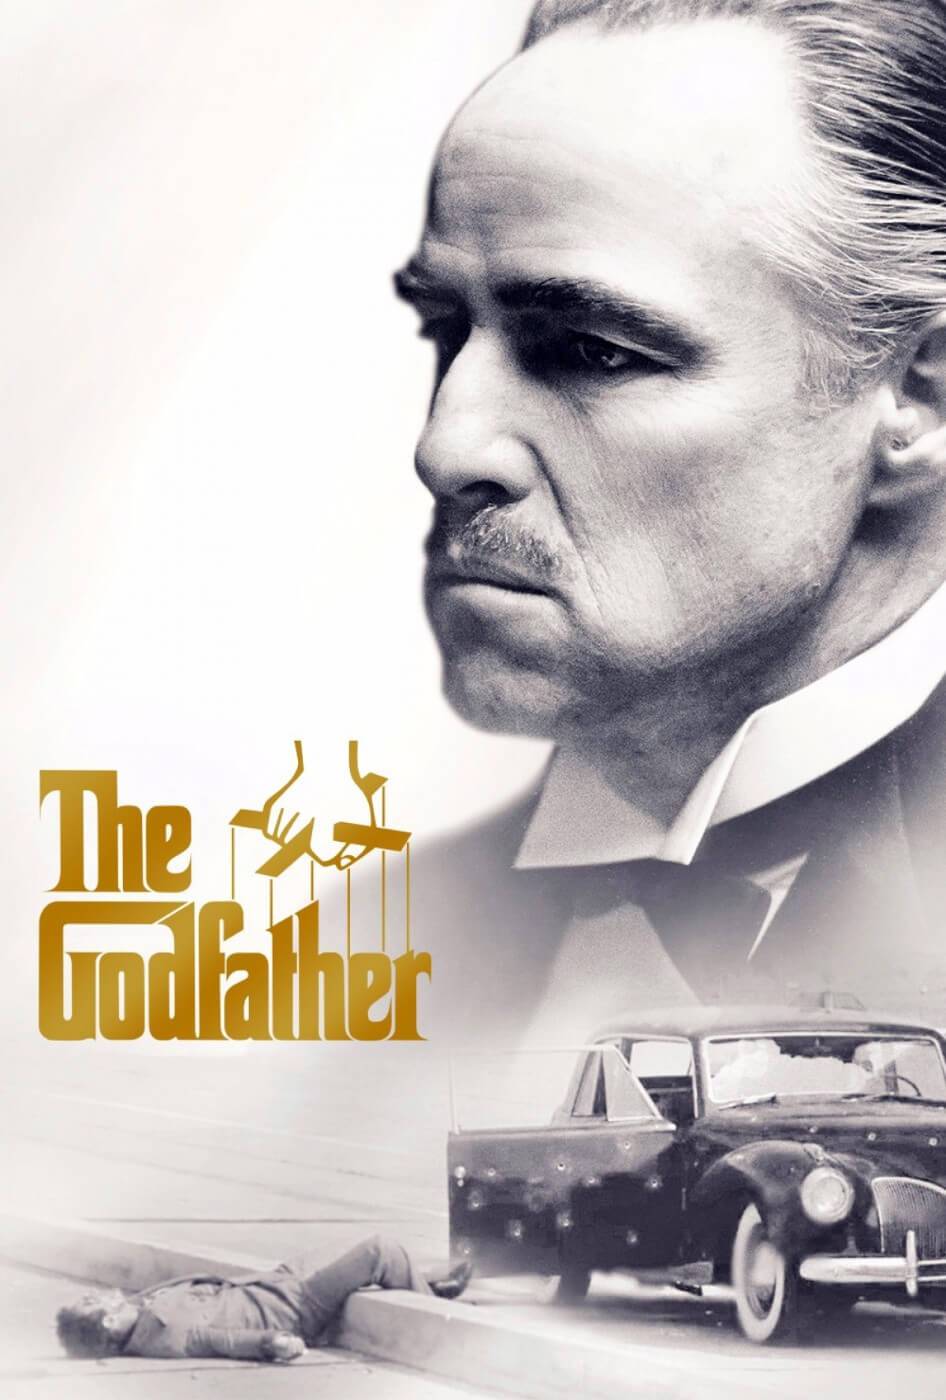 Movie Poster Art - The Godfather - Tallenge Hollywood Poster Collection -  Canvas Prints by Bethany Morrison | Buy Posters, Frames, Canvas & Digital  Art Prints | Small, Compact, Medium and Large Variants